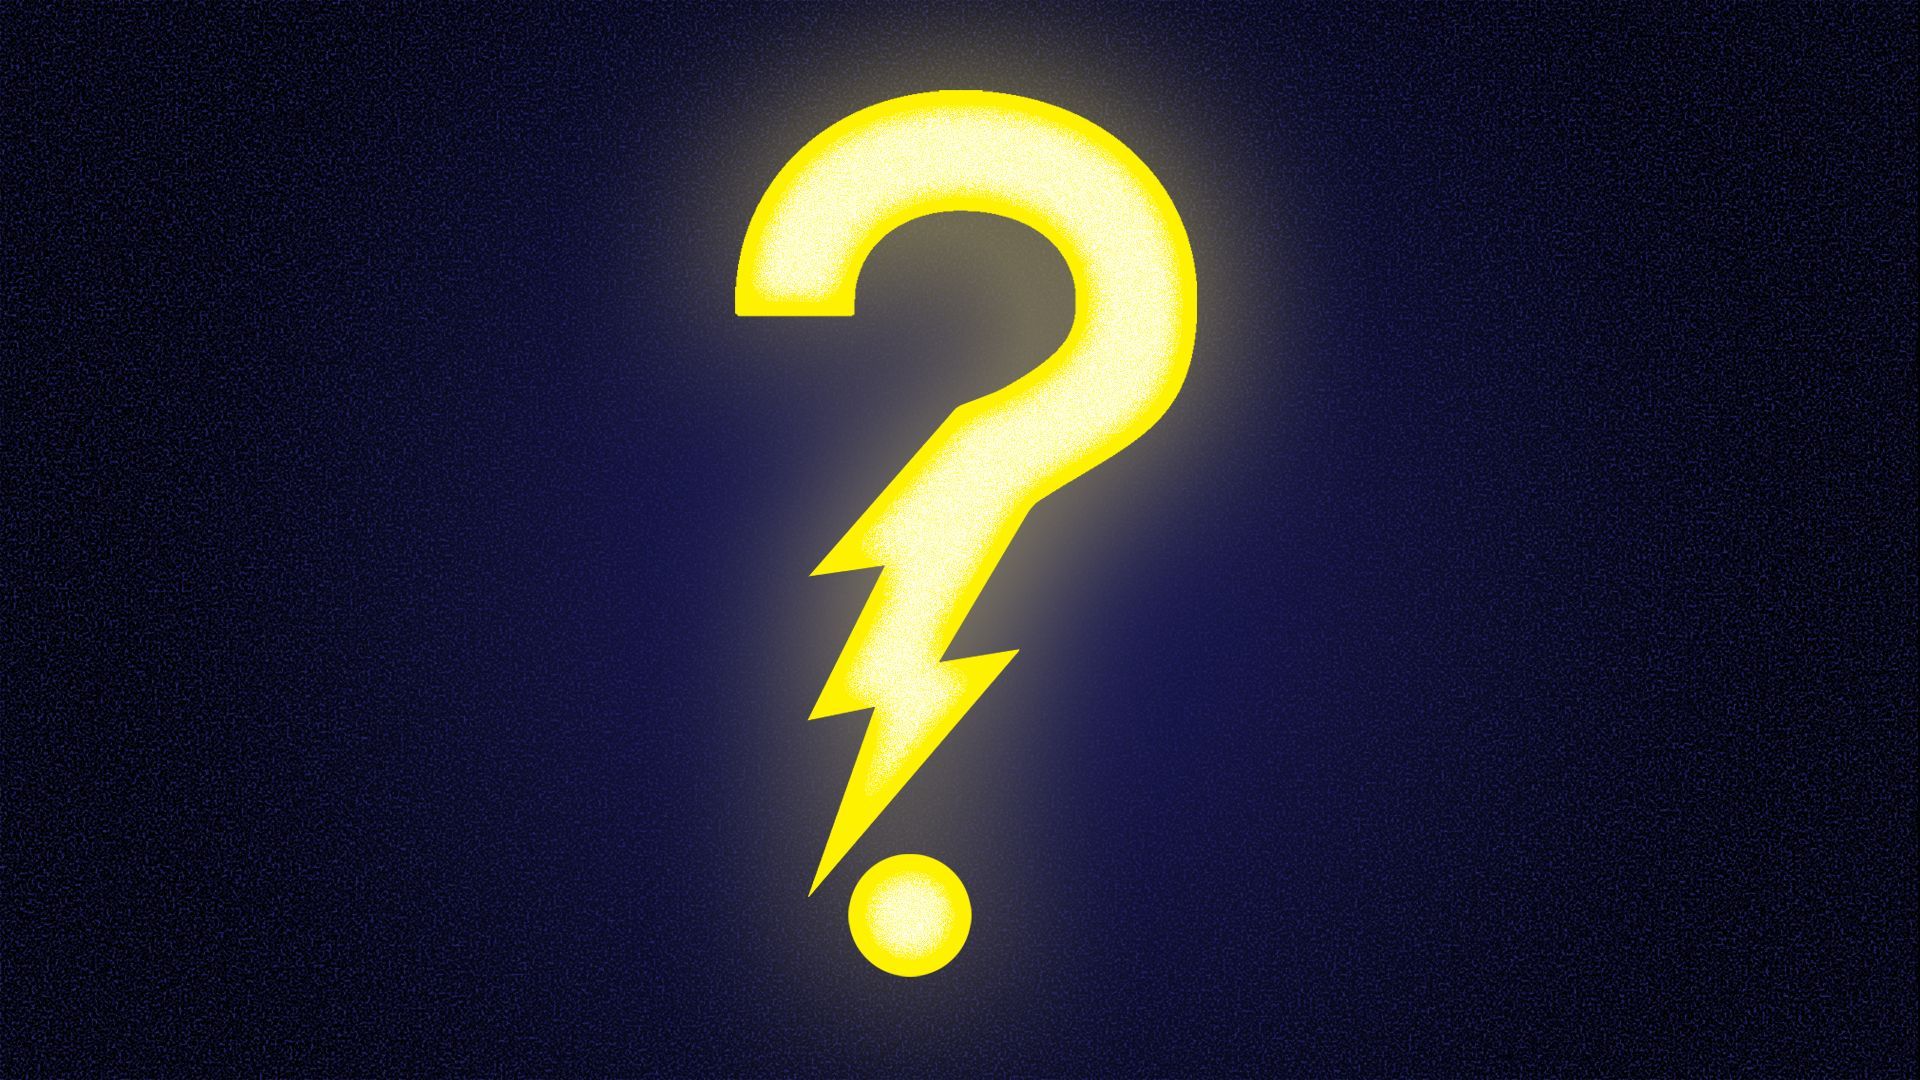 Illustration of a question mark combined with a lightning bolt shape